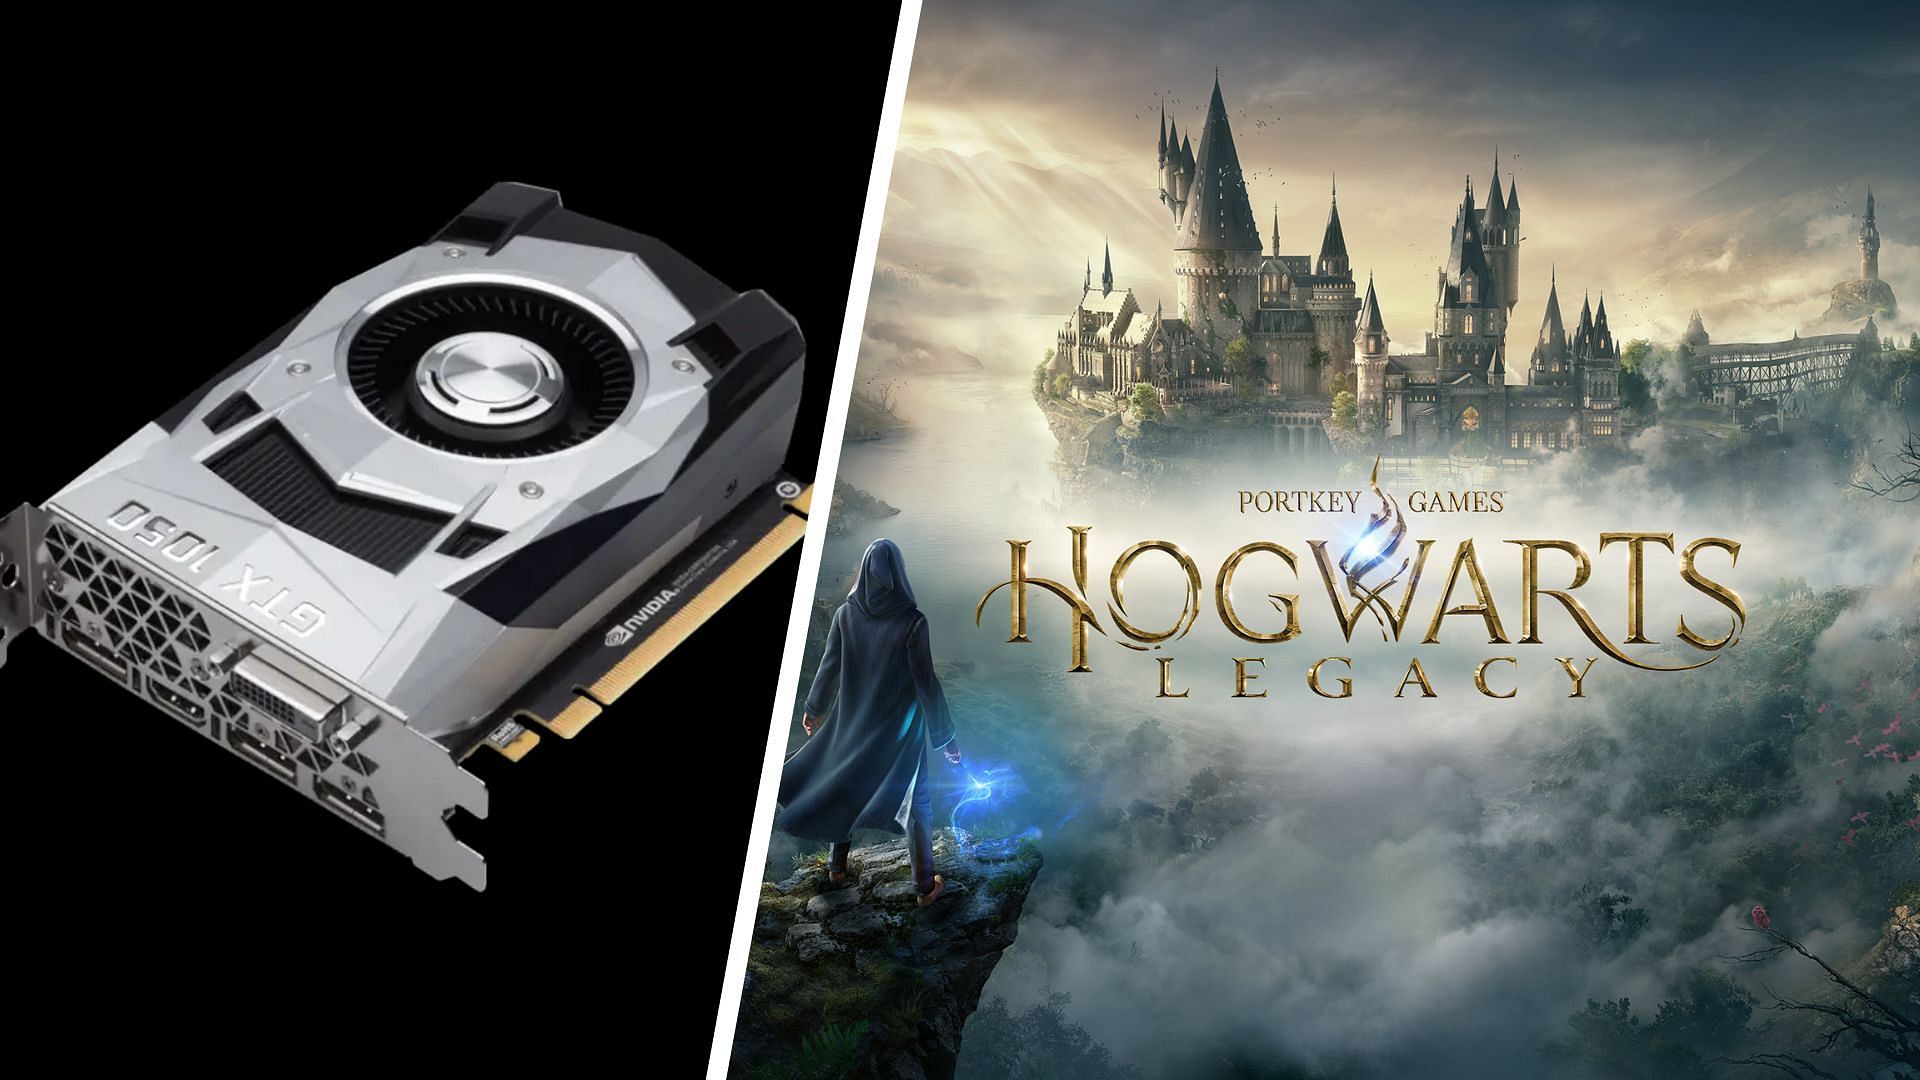 GTX 1050 FE and Hogwarts Legacy cover